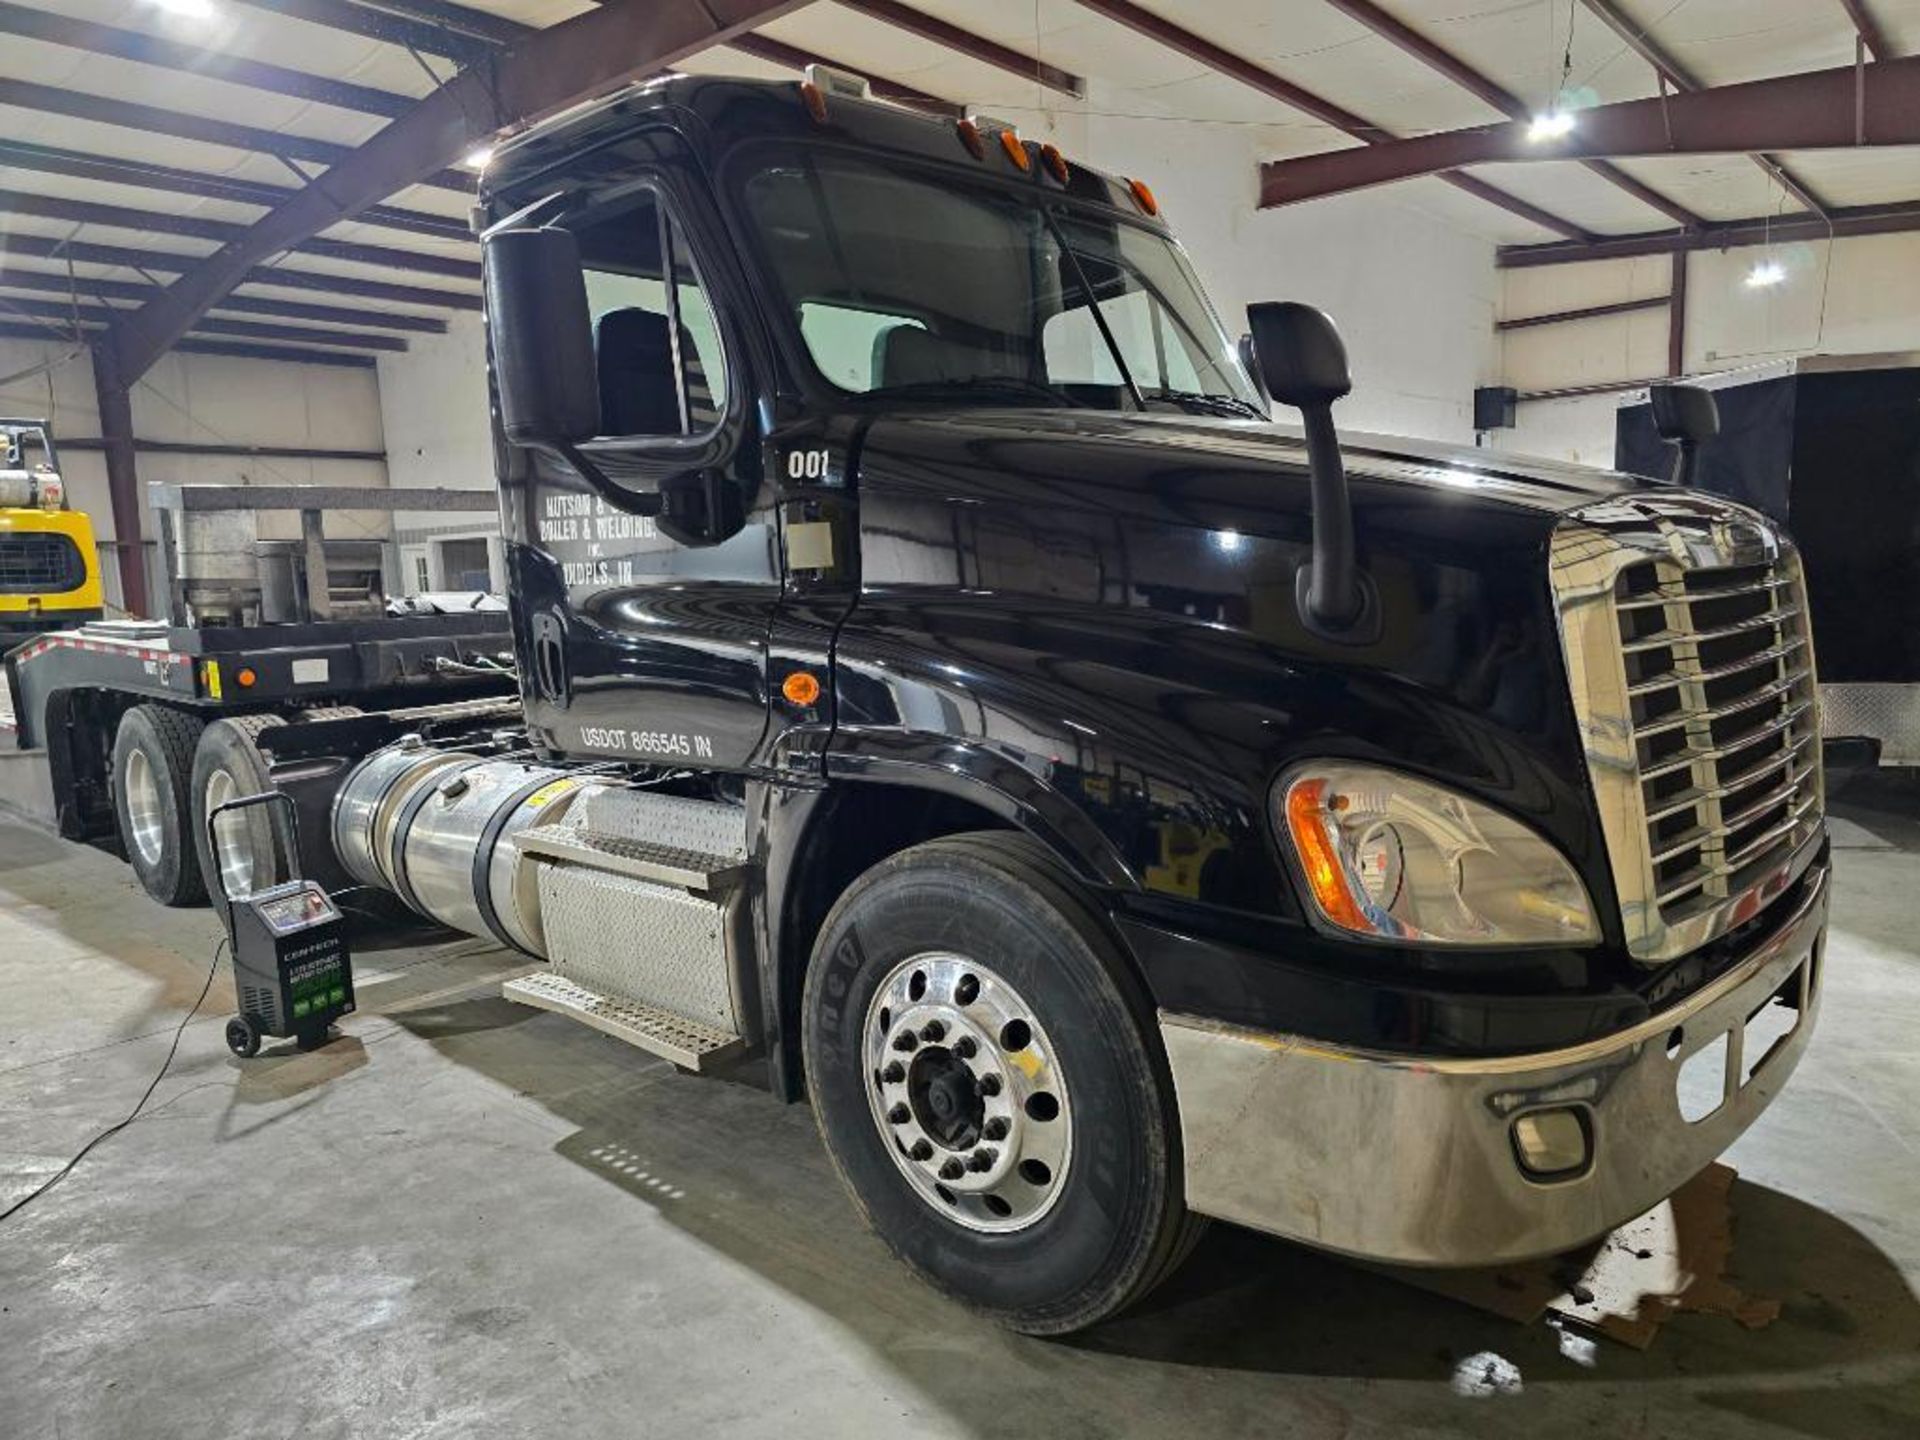 2010 Freightliner Tandem Axle Tractor, 615,000 Miles, 10-Speed Eaton, Wet Kit, 500-HP Detroit, Day C - Image 4 of 9